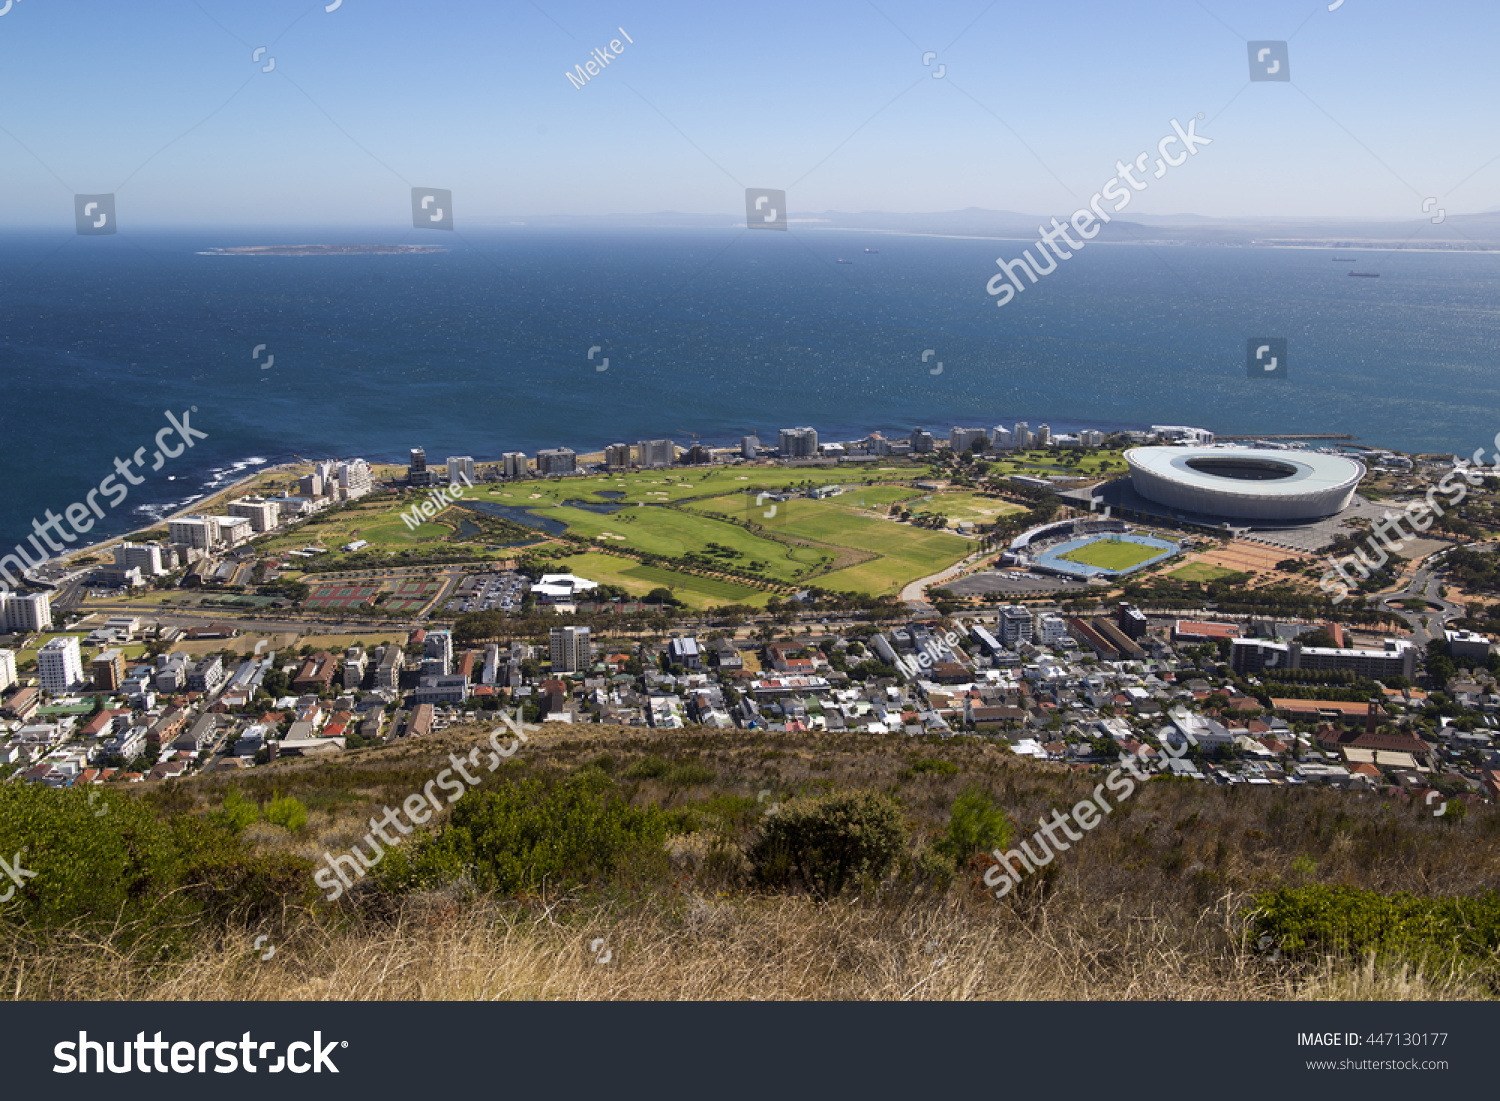 View over cape town #447130177